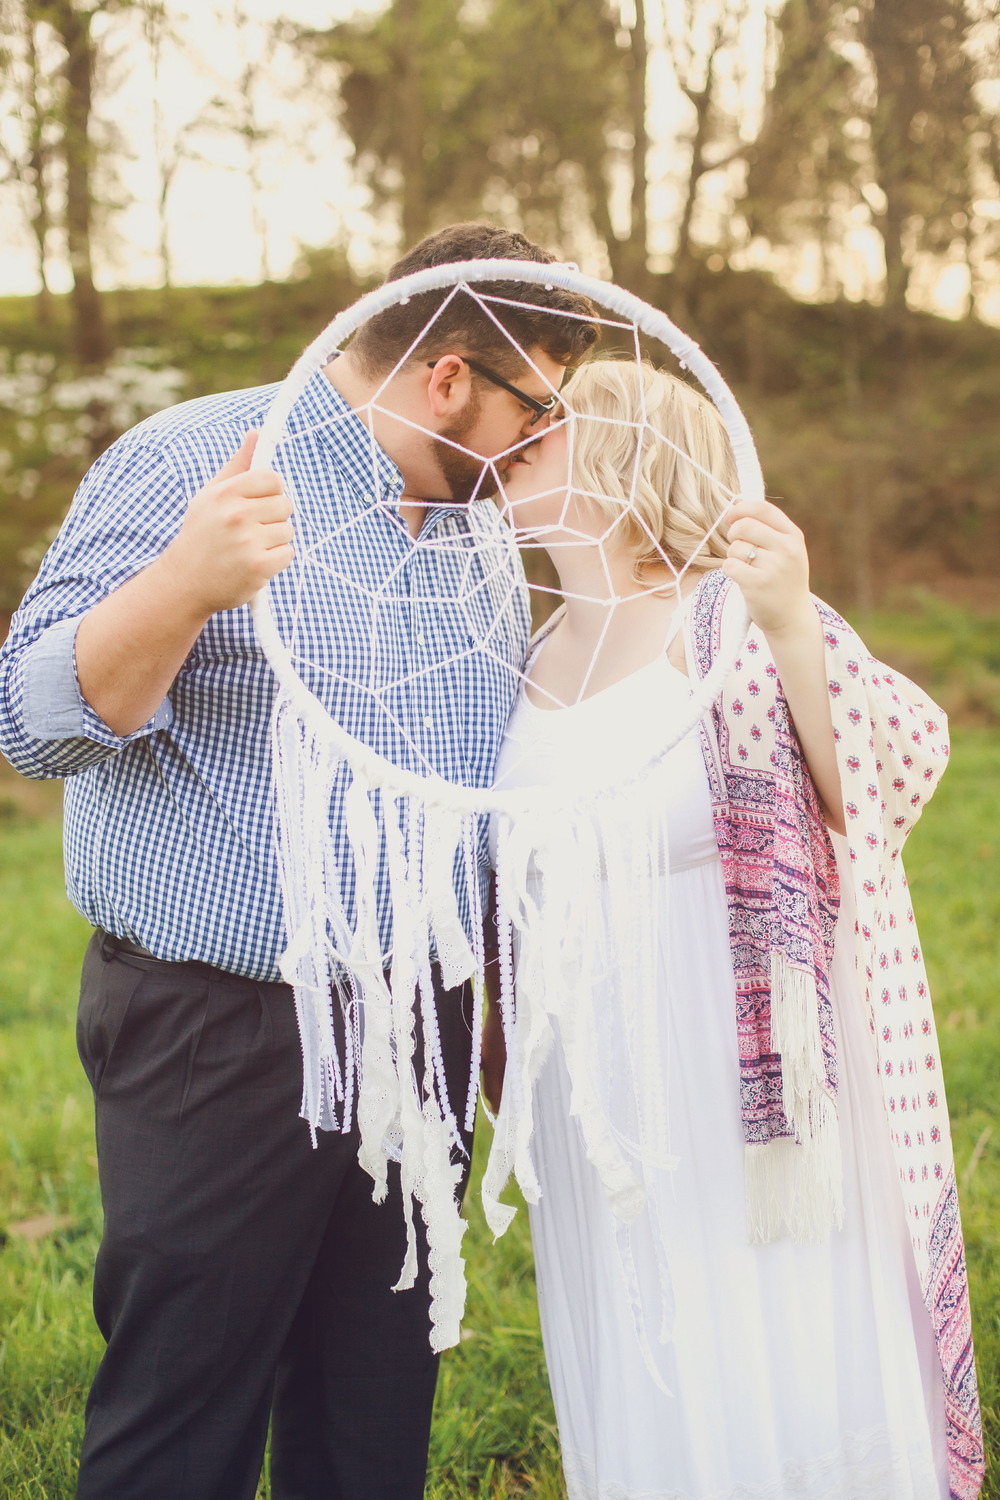   Chas + Tracy's Whimsical Engagement Session | Photography by Two Arrows Photography | Find more at twoarrowsphotos.com  